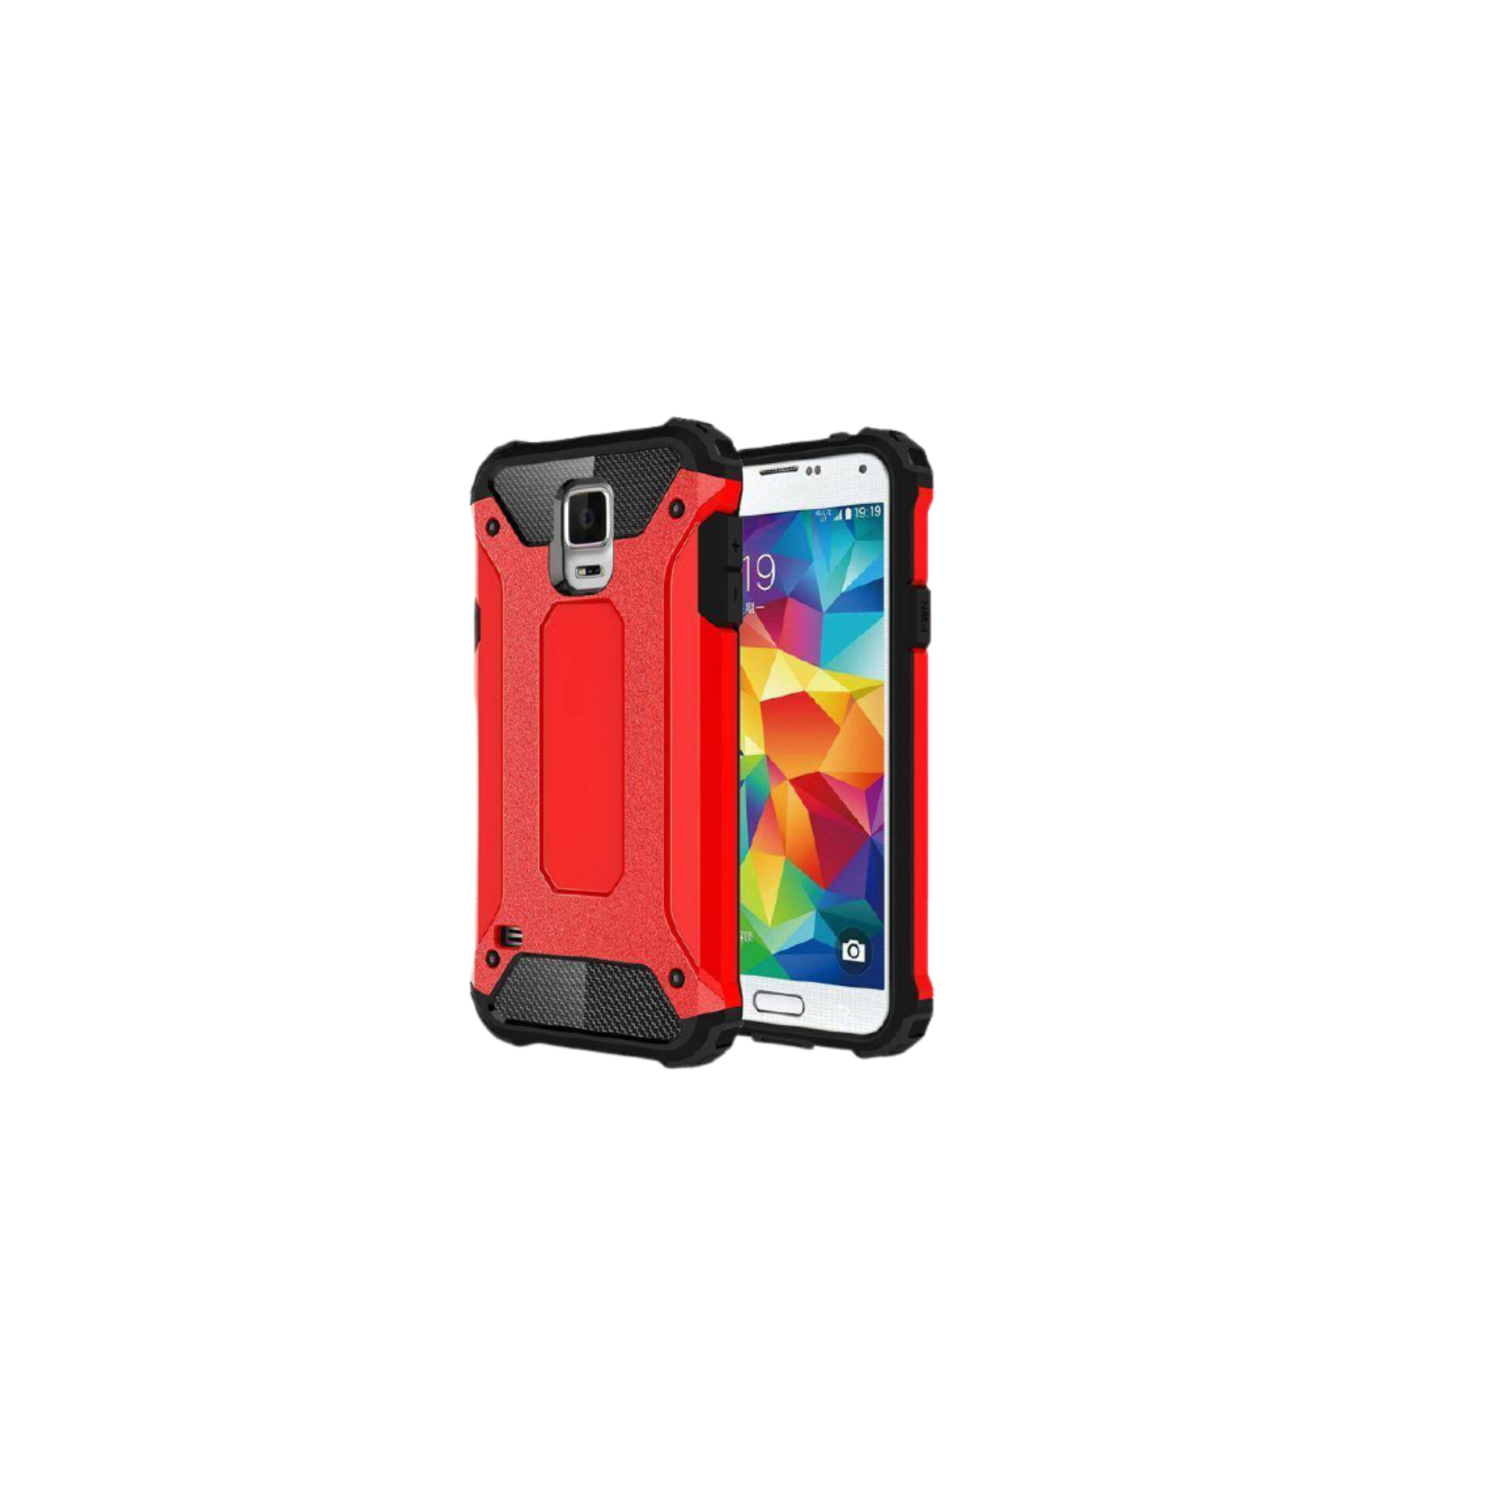 For Samsung Galaxy S5 / S6 Case - Dual Layer Hybrid Shockproof Armor Cover